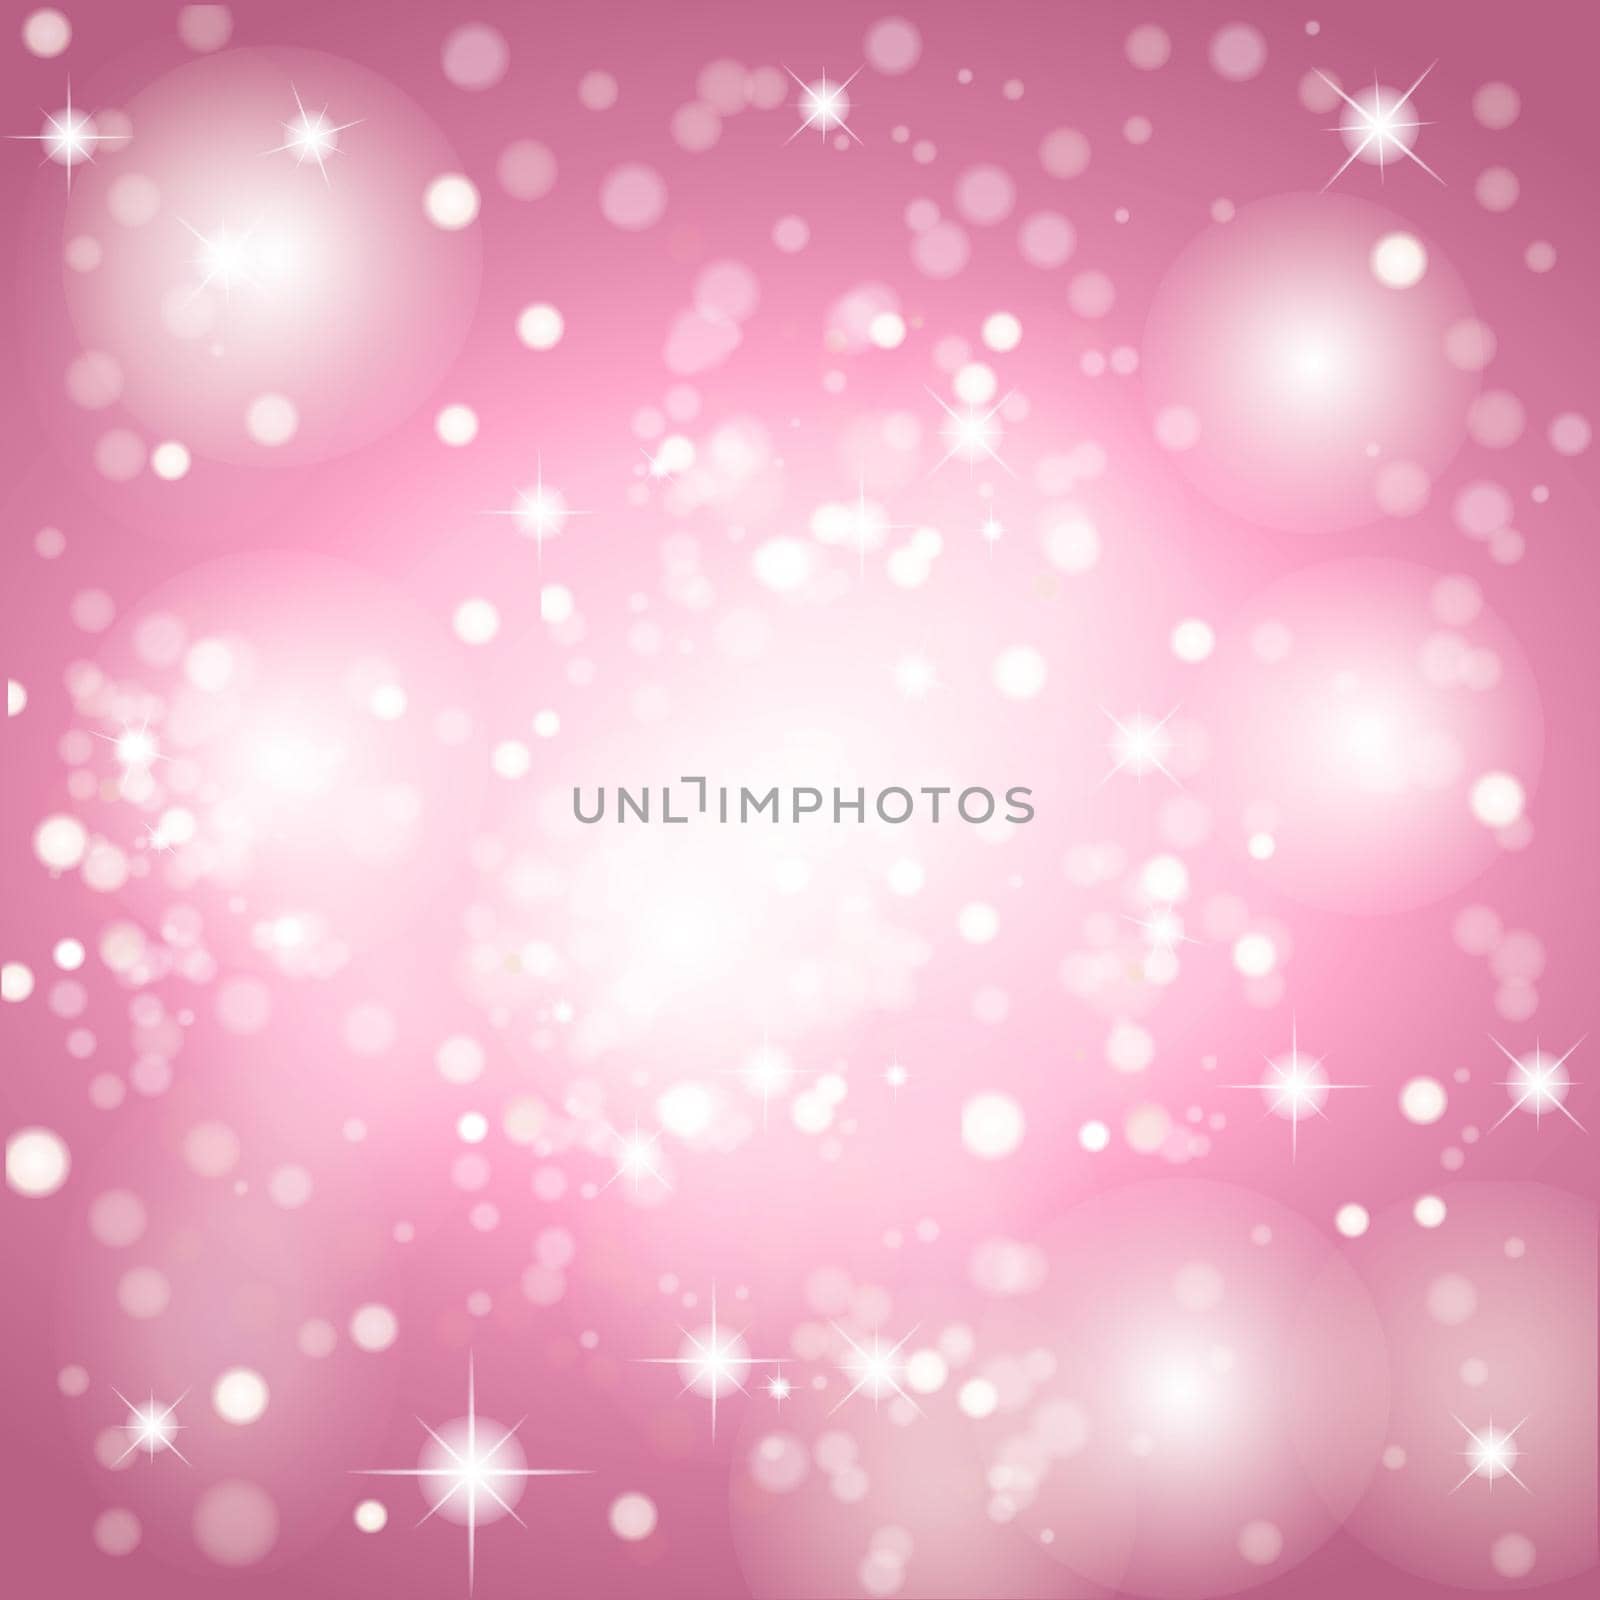 Pink abstract romantic background with stars. EPS10 vector file included